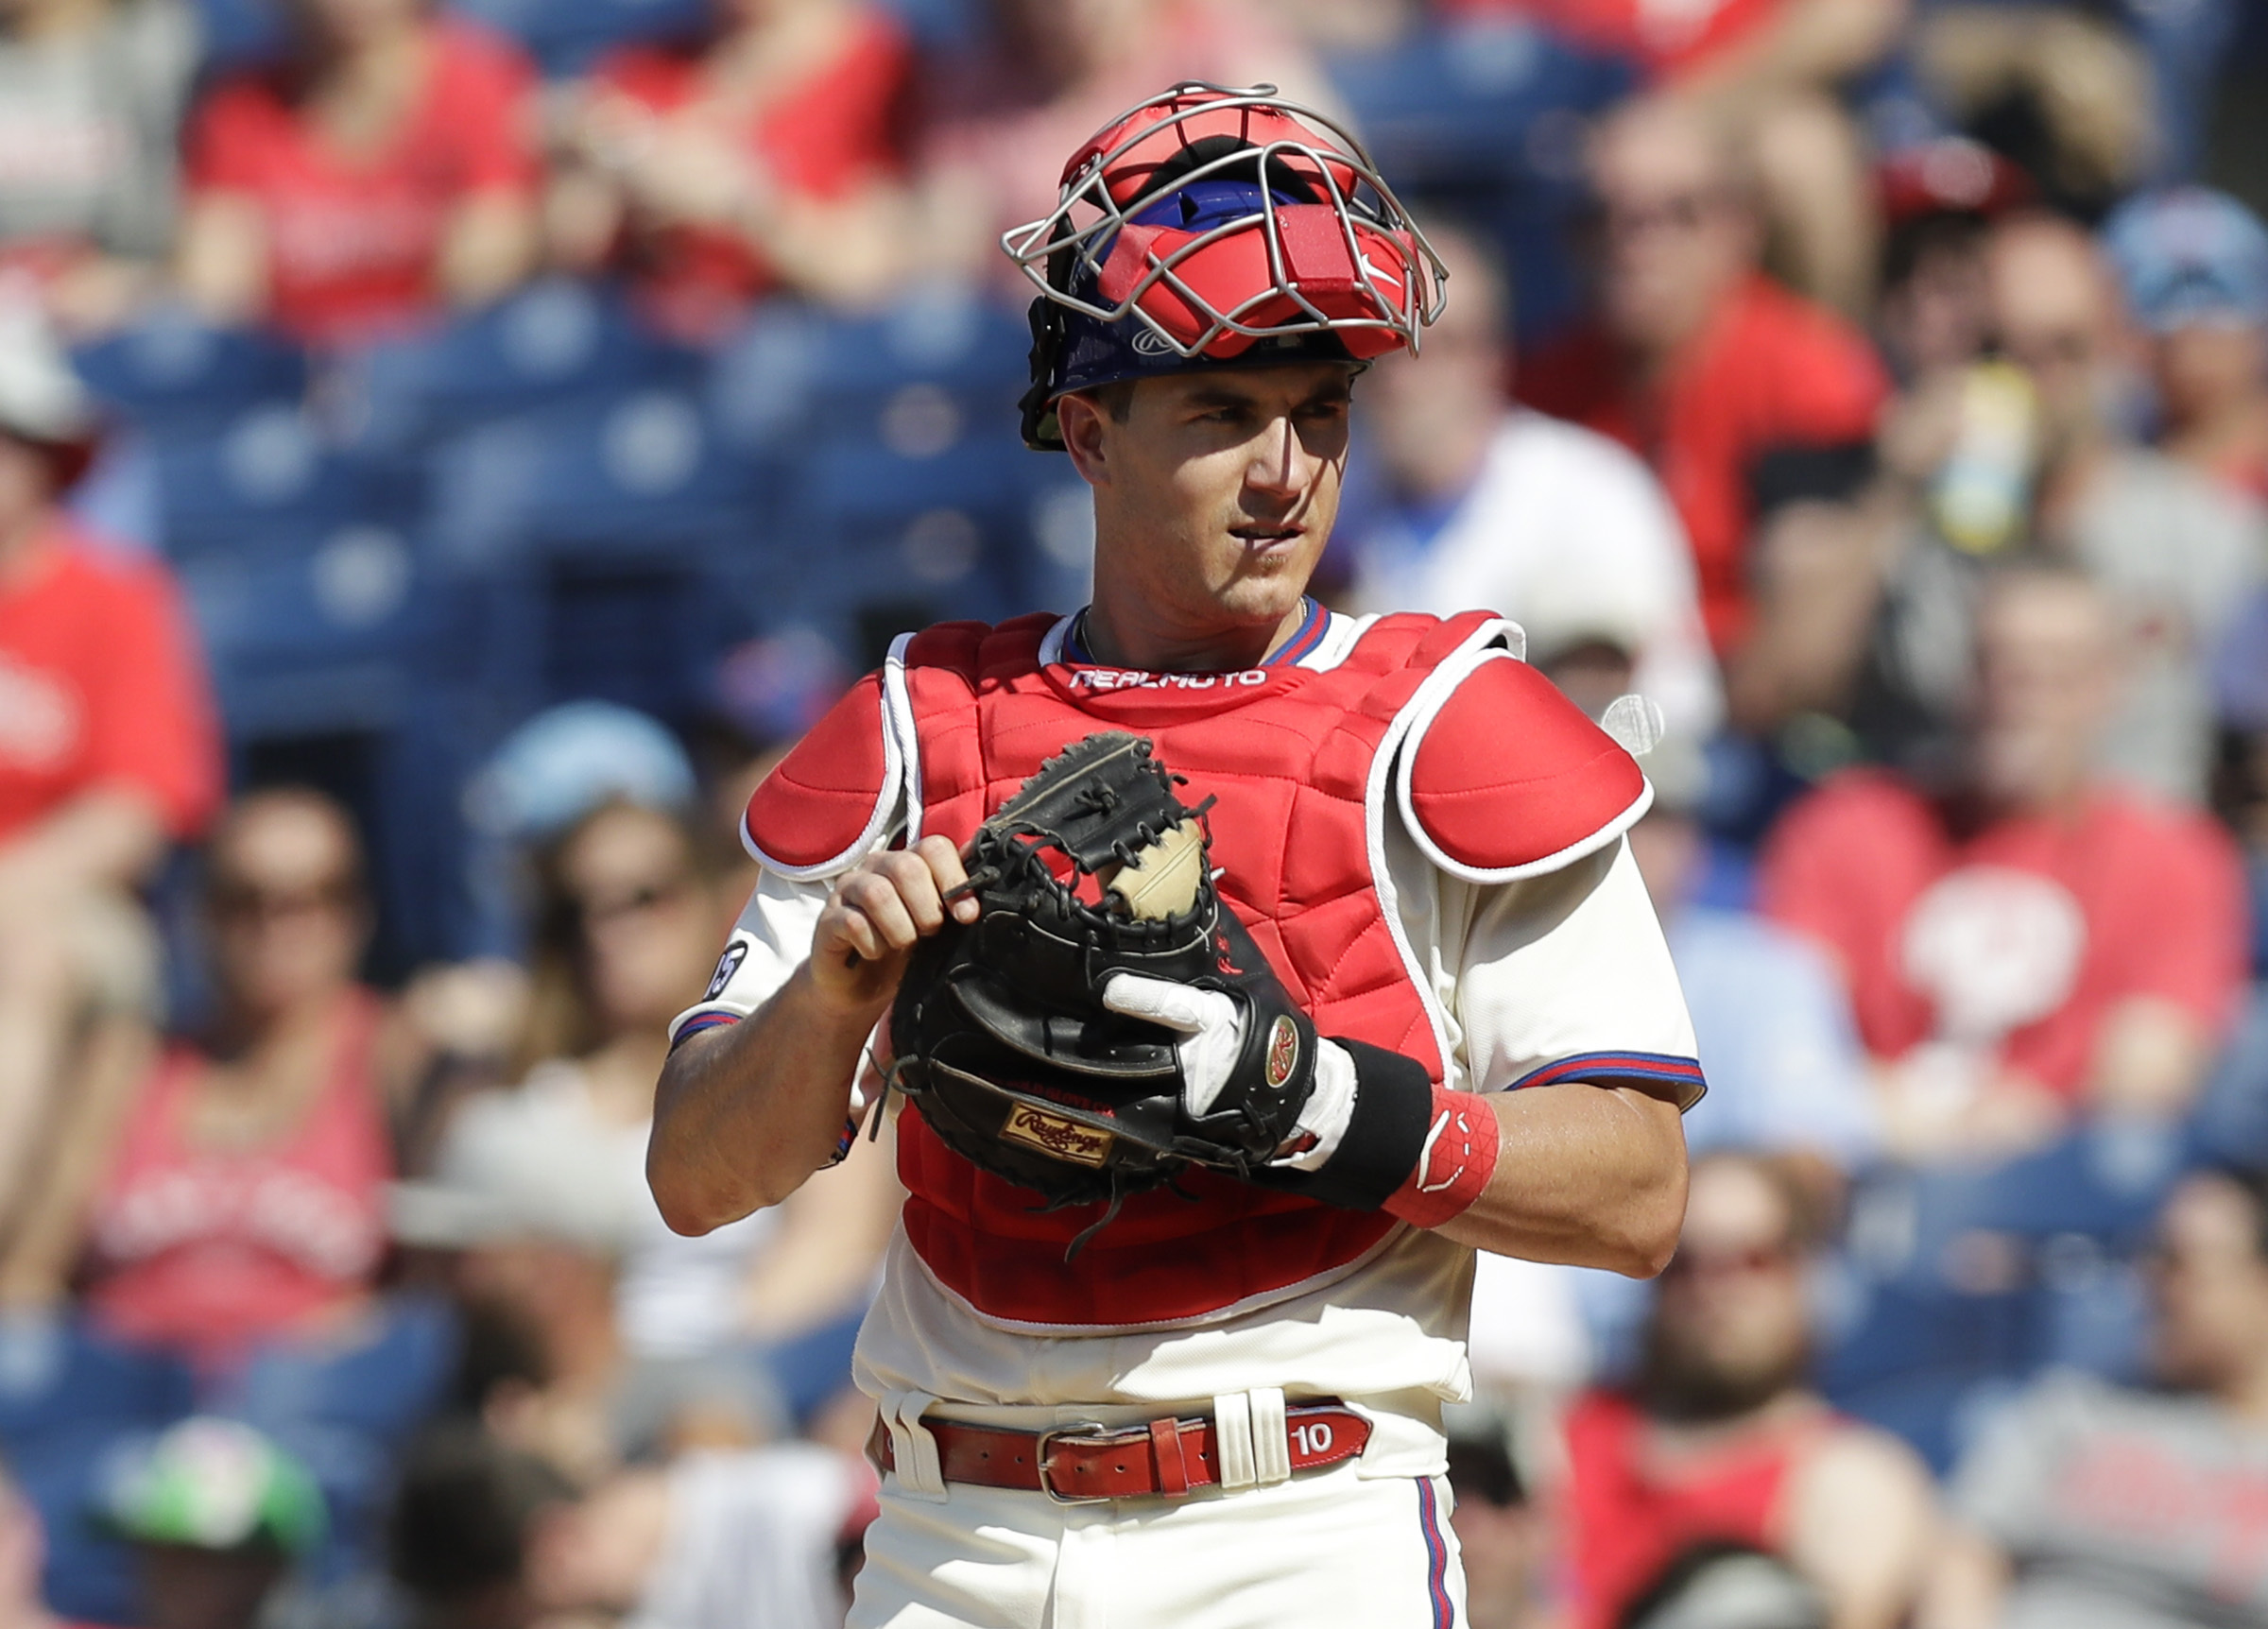 J.T. Realmuto Named 2021 All-Star, Joins Short Phillies List